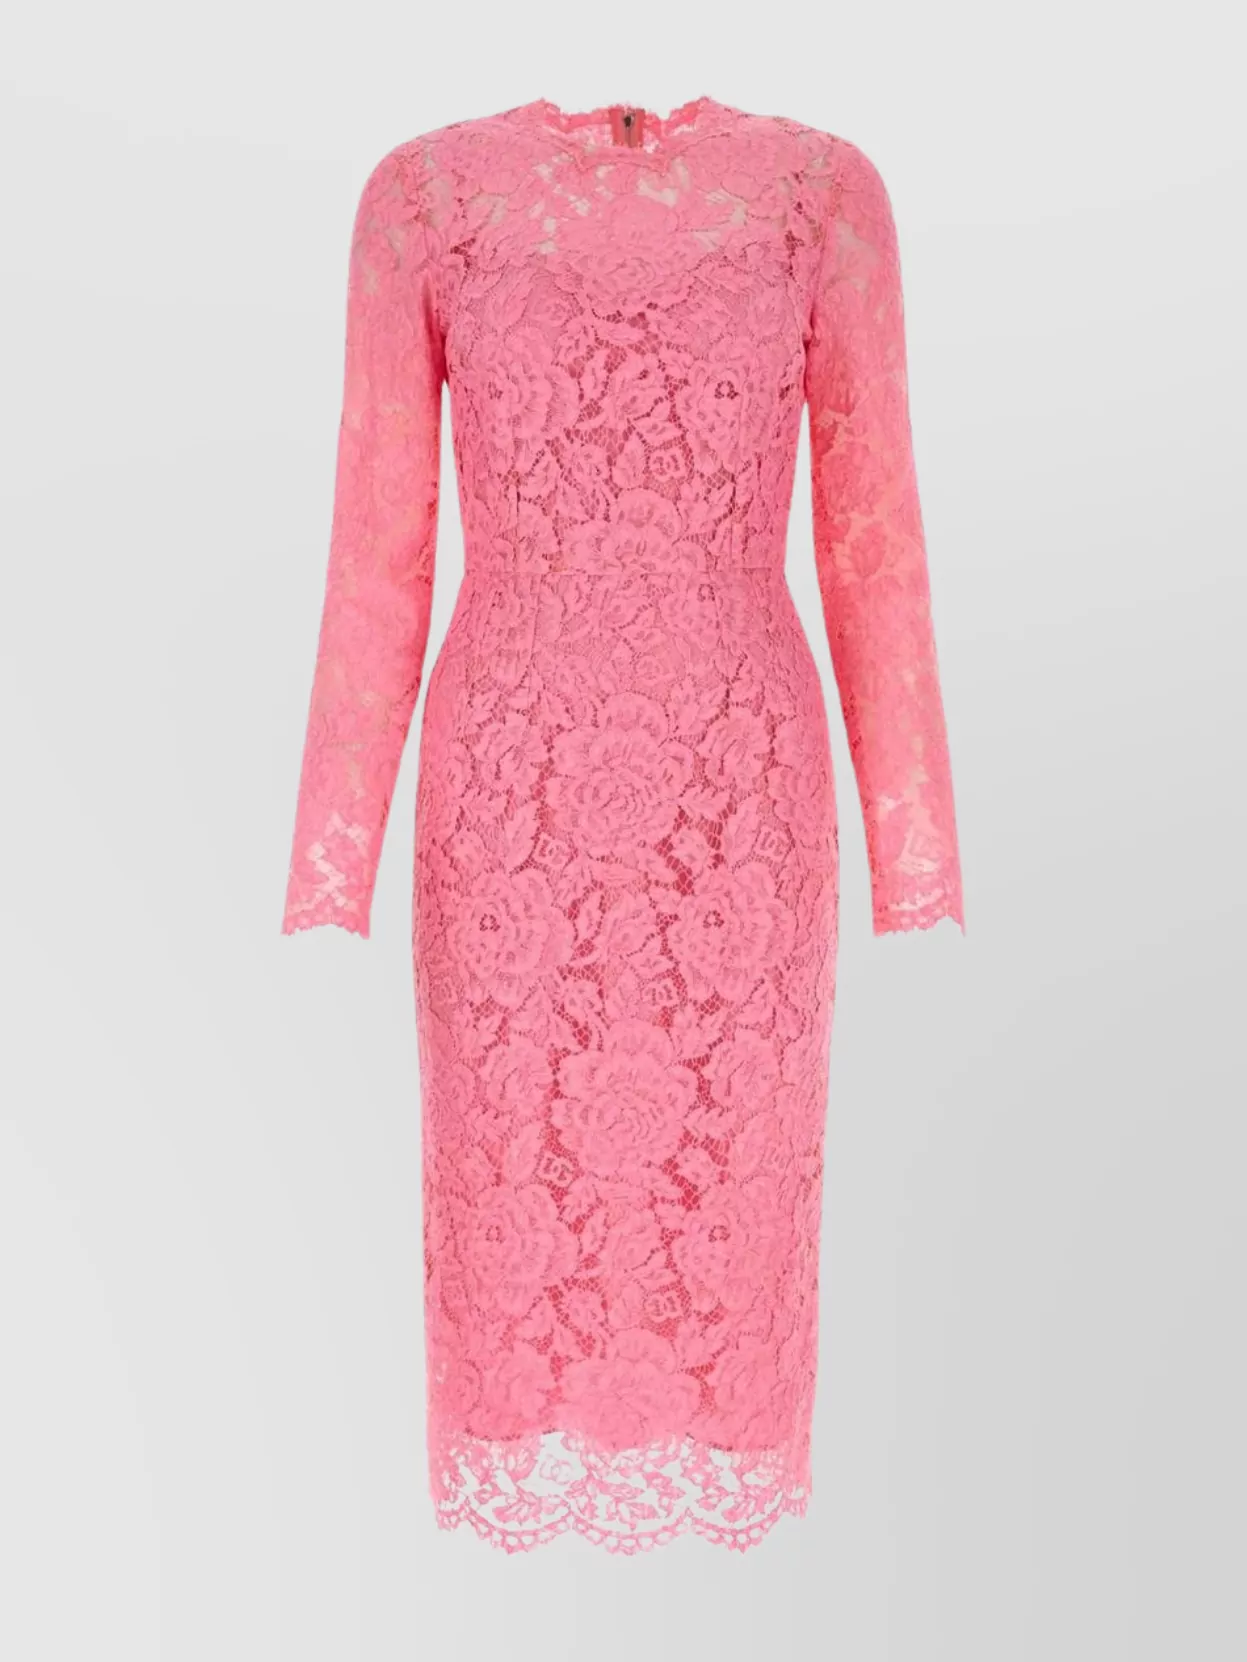 Dolce & Gabbana Lace Overlay Knee Length Dress In Pink